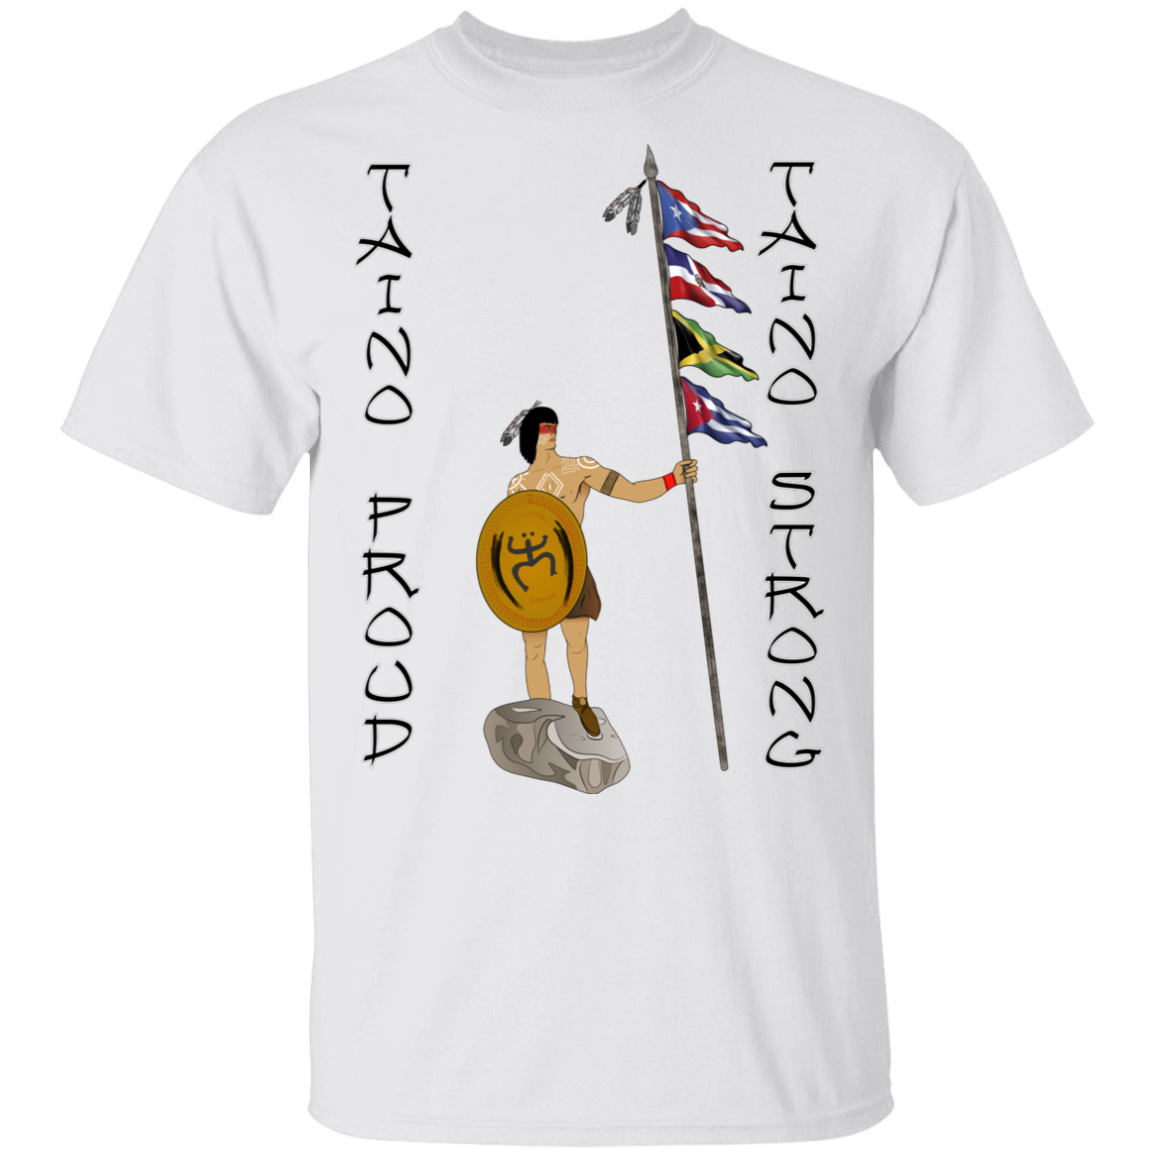 Taino Proud and Strong 5.3 oz. T-Shirt - Puerto Rican Pride